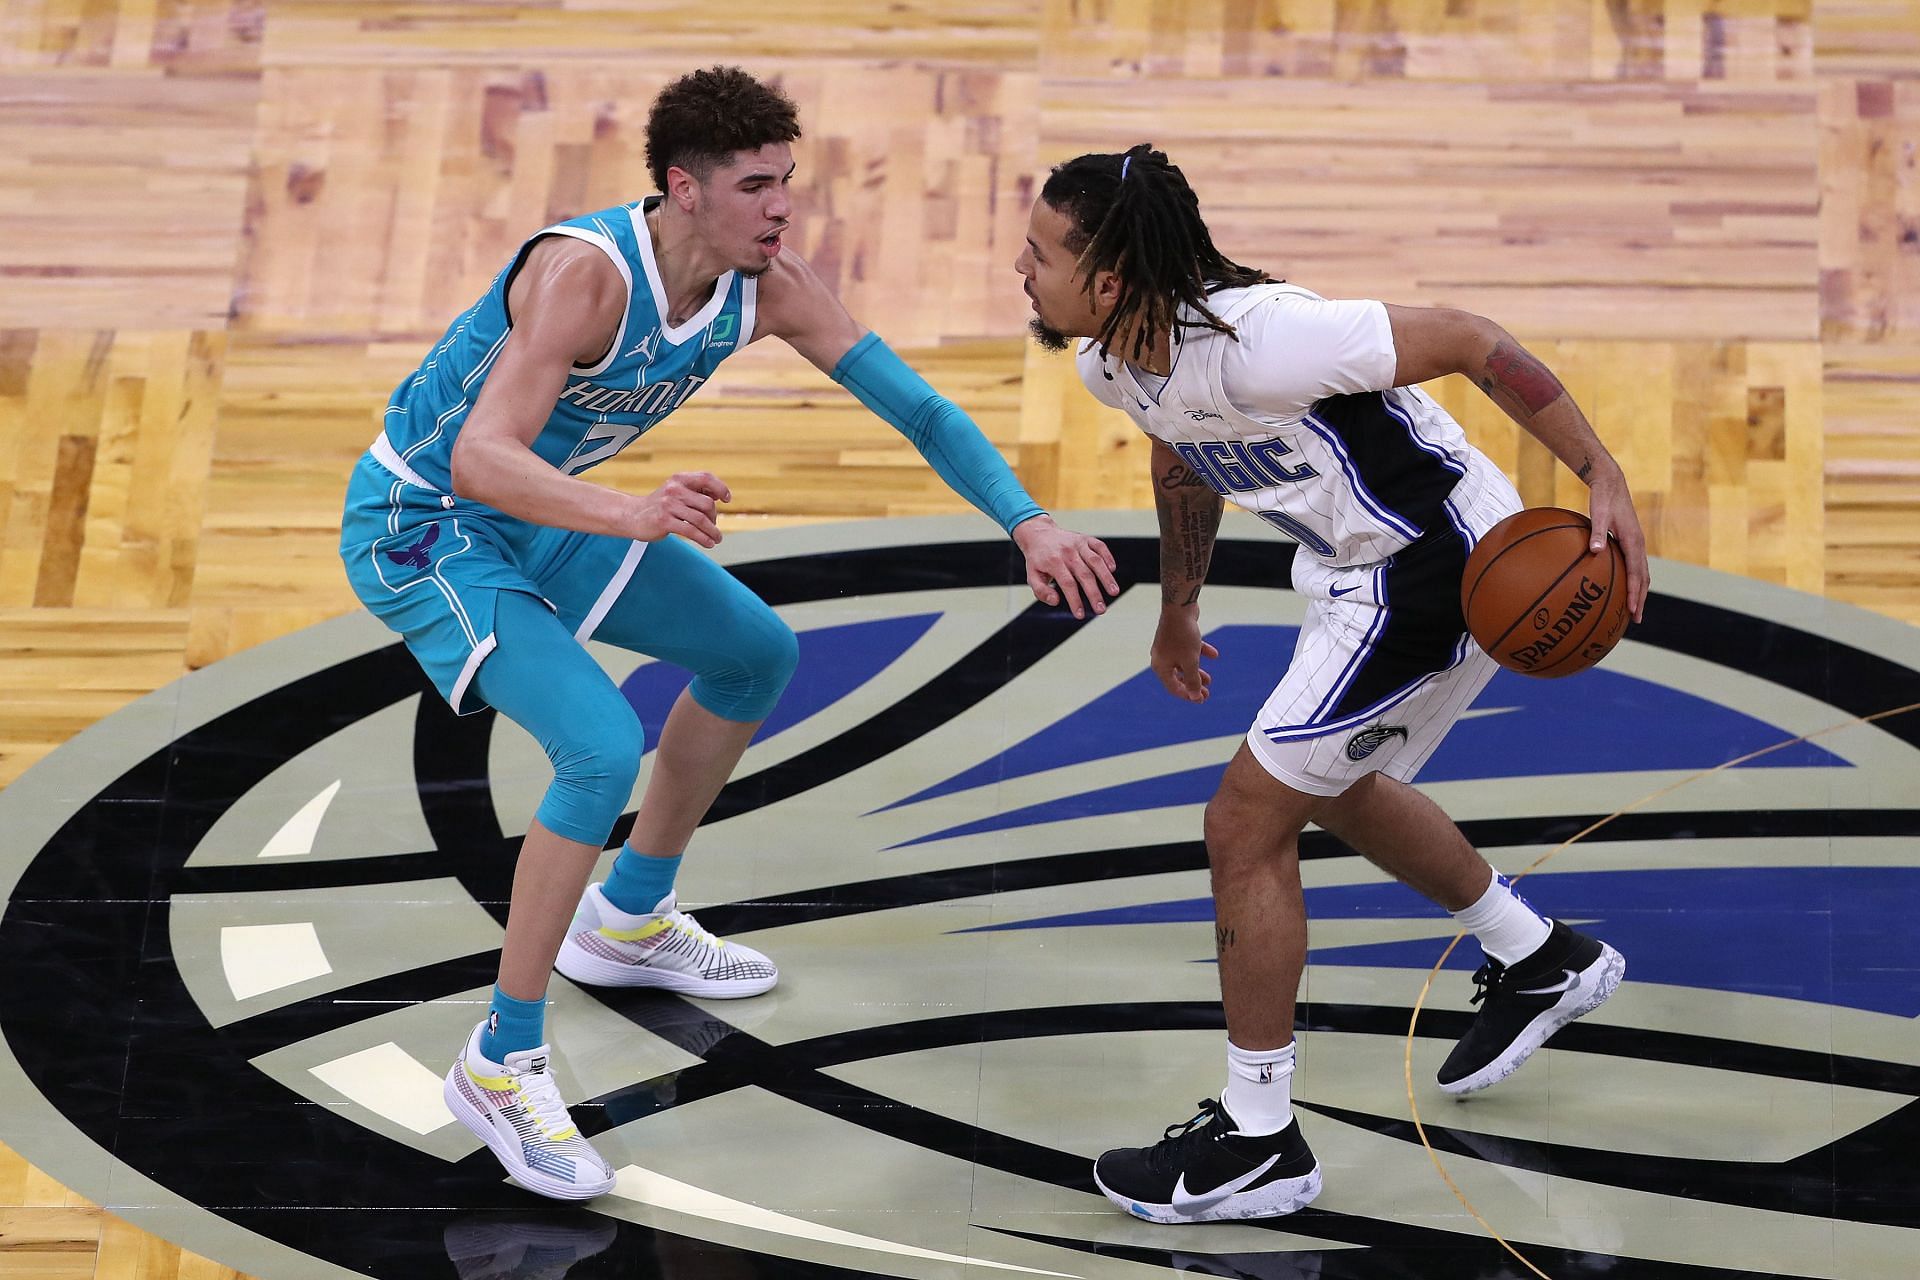 LaMelo Ball (left) defends Cole Anthony (right)